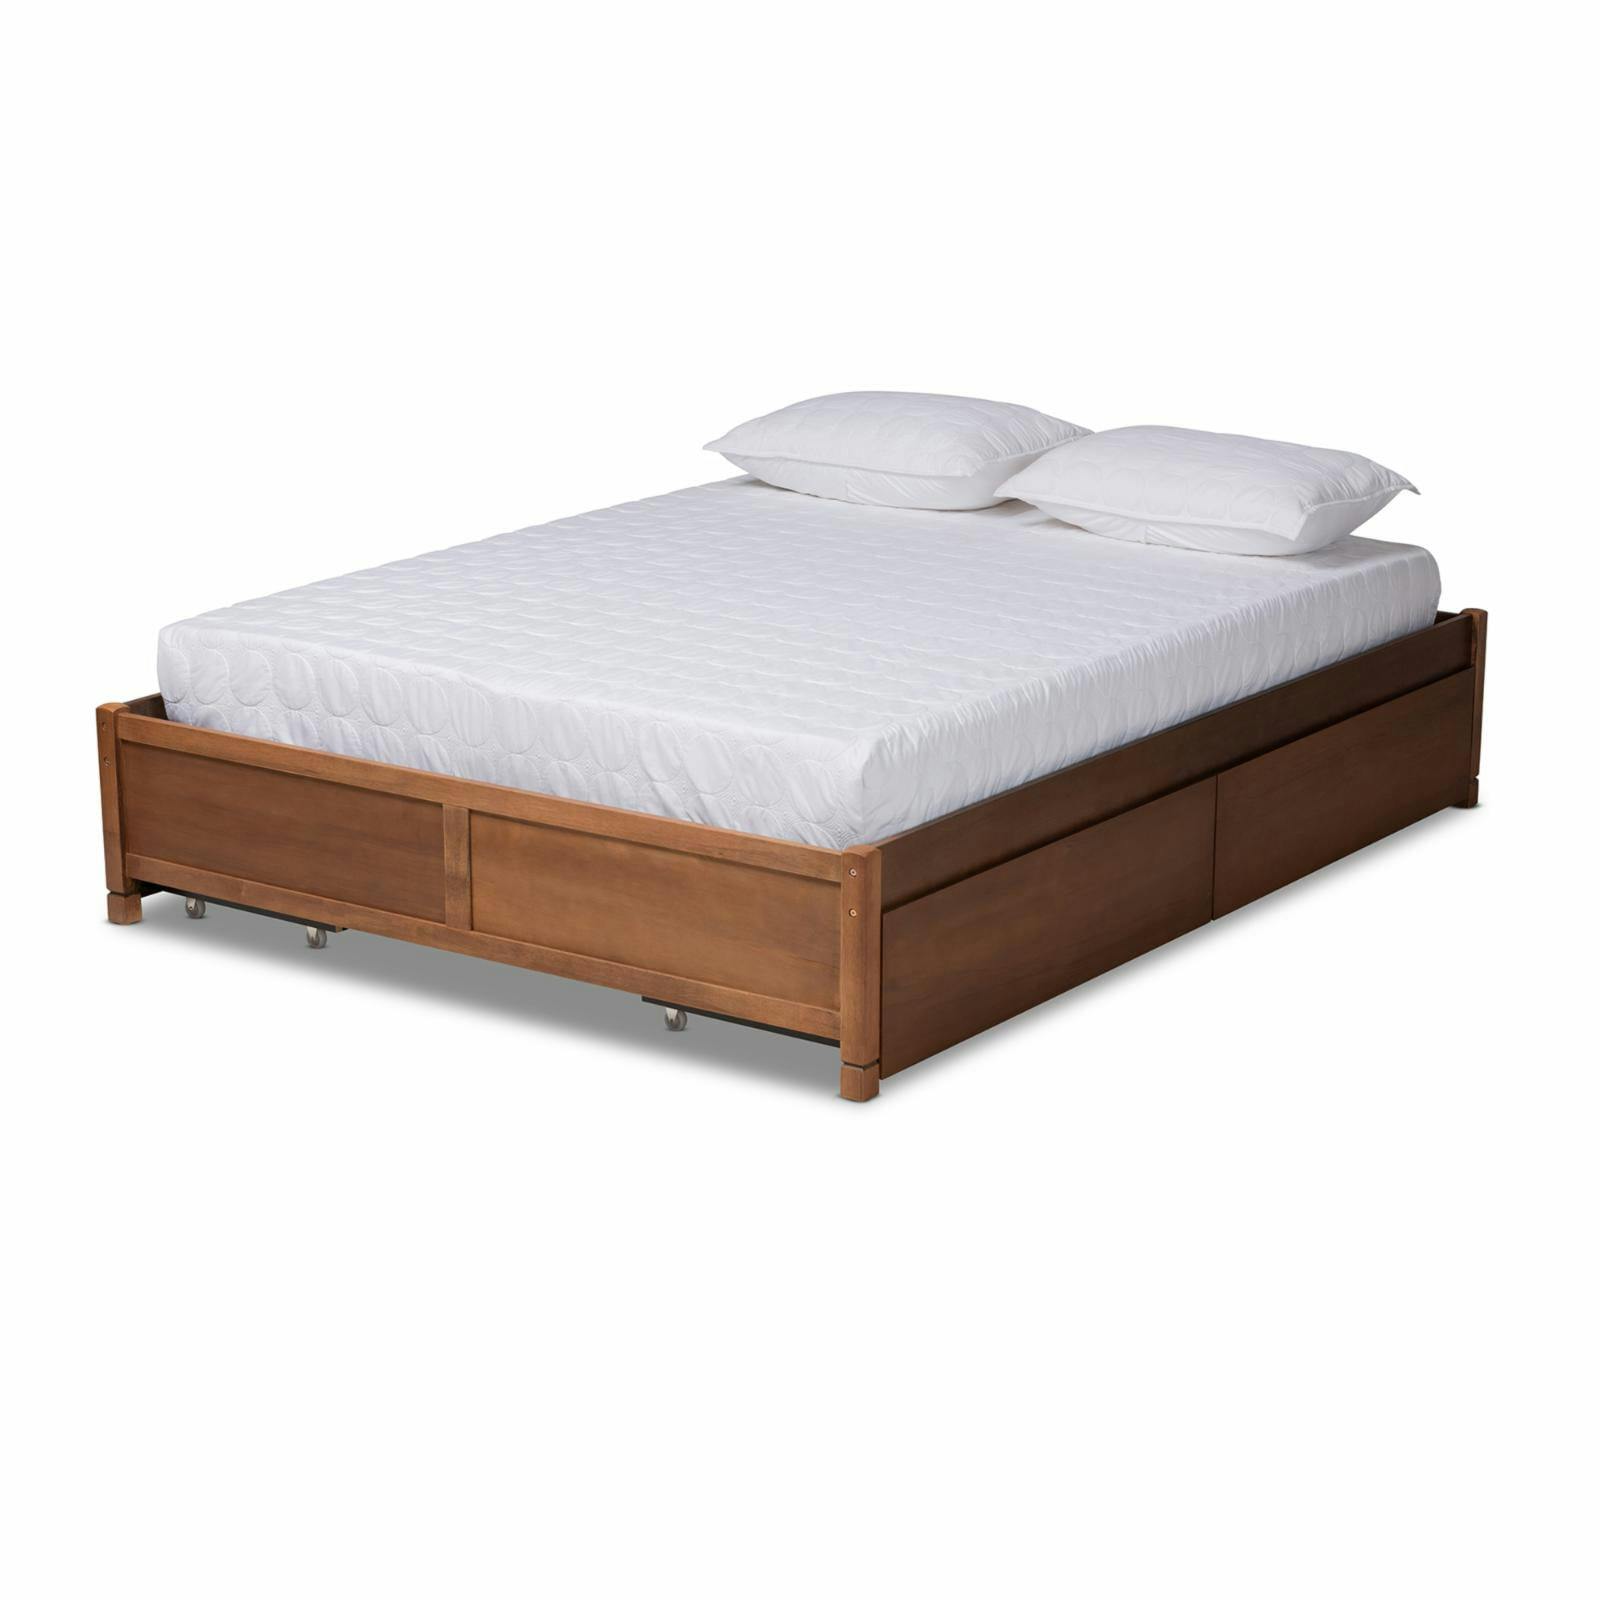 Yara Walnut Queen Bed with Tufted Upholstery and 4 Storage Drawers